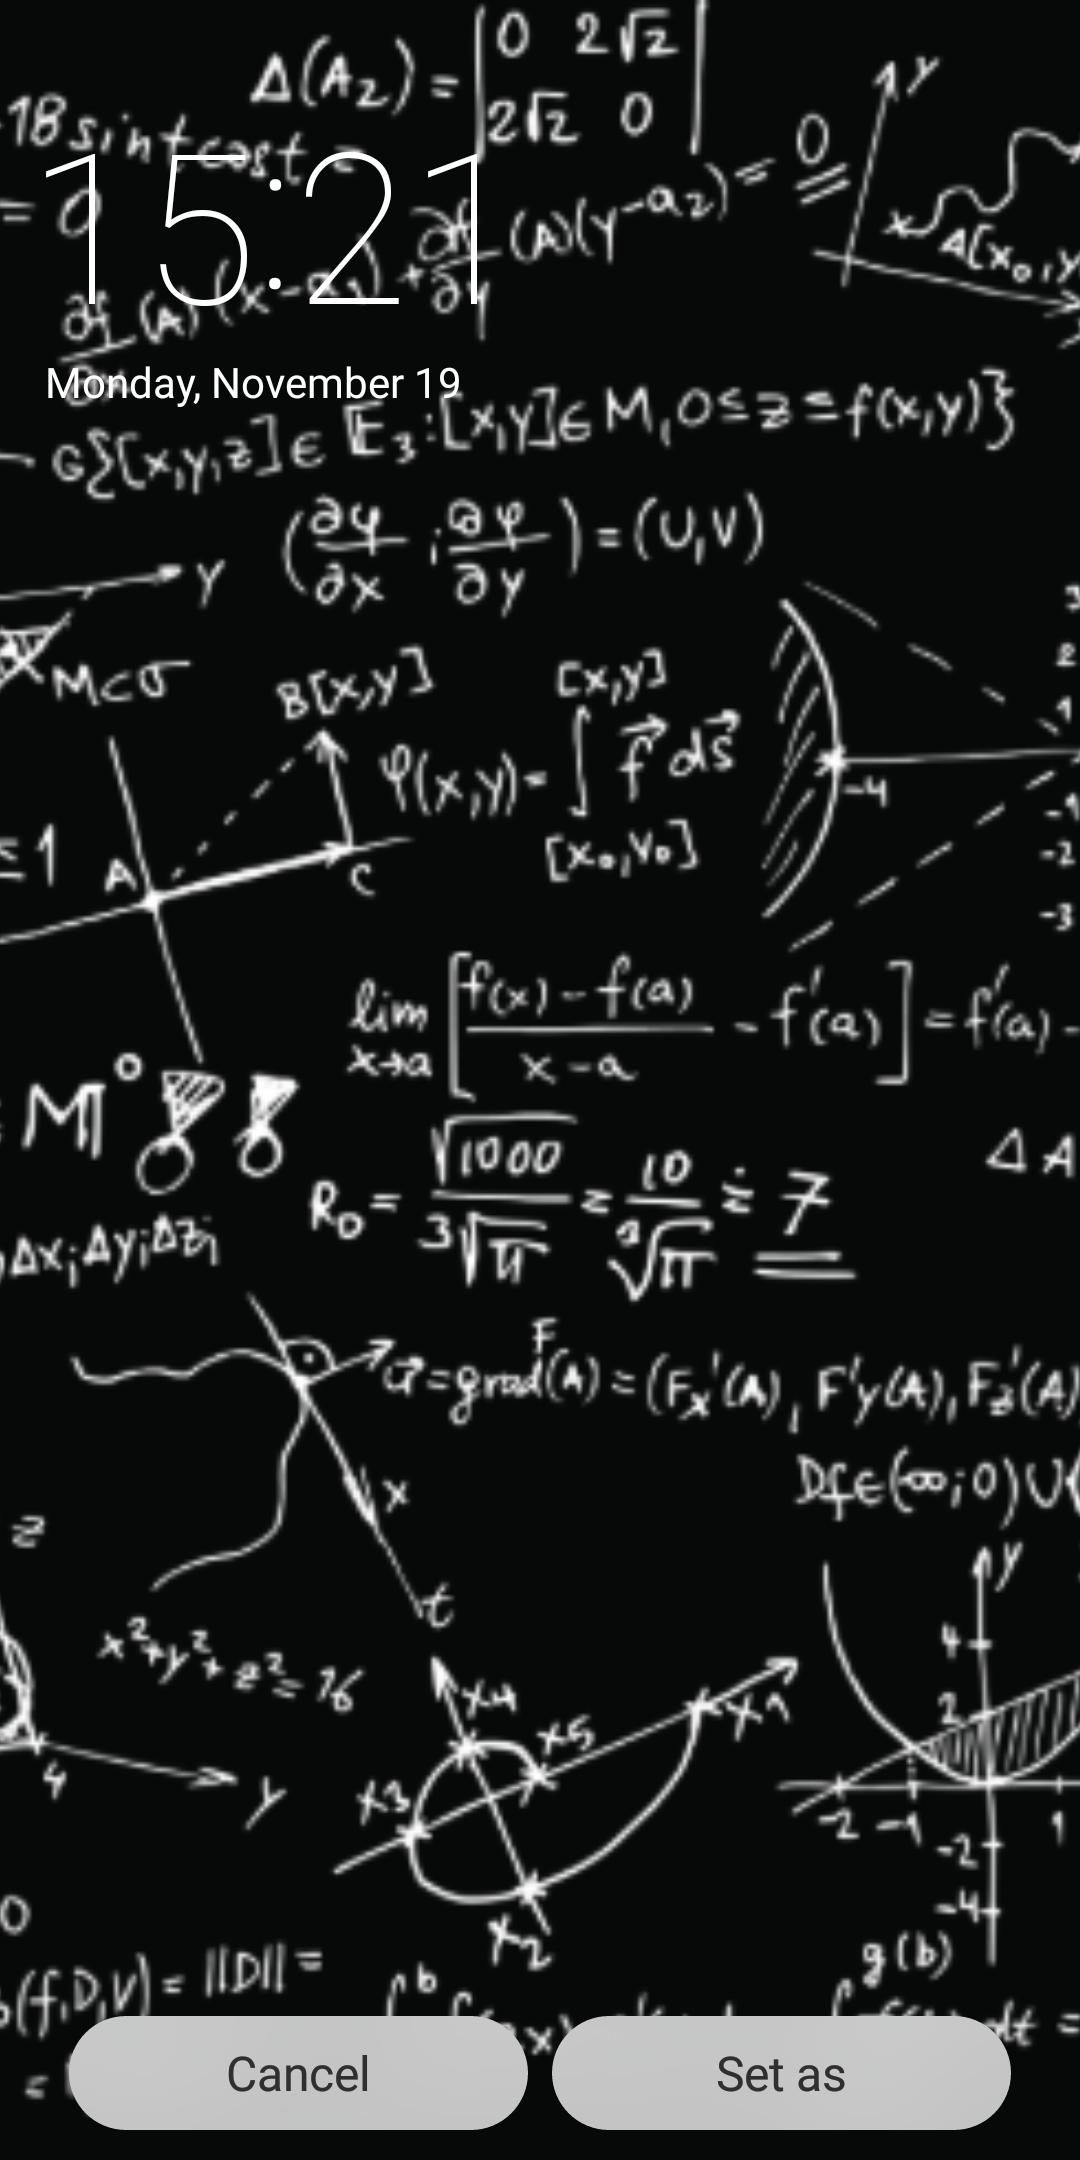 Math Equation Wallpaper For Android Apk